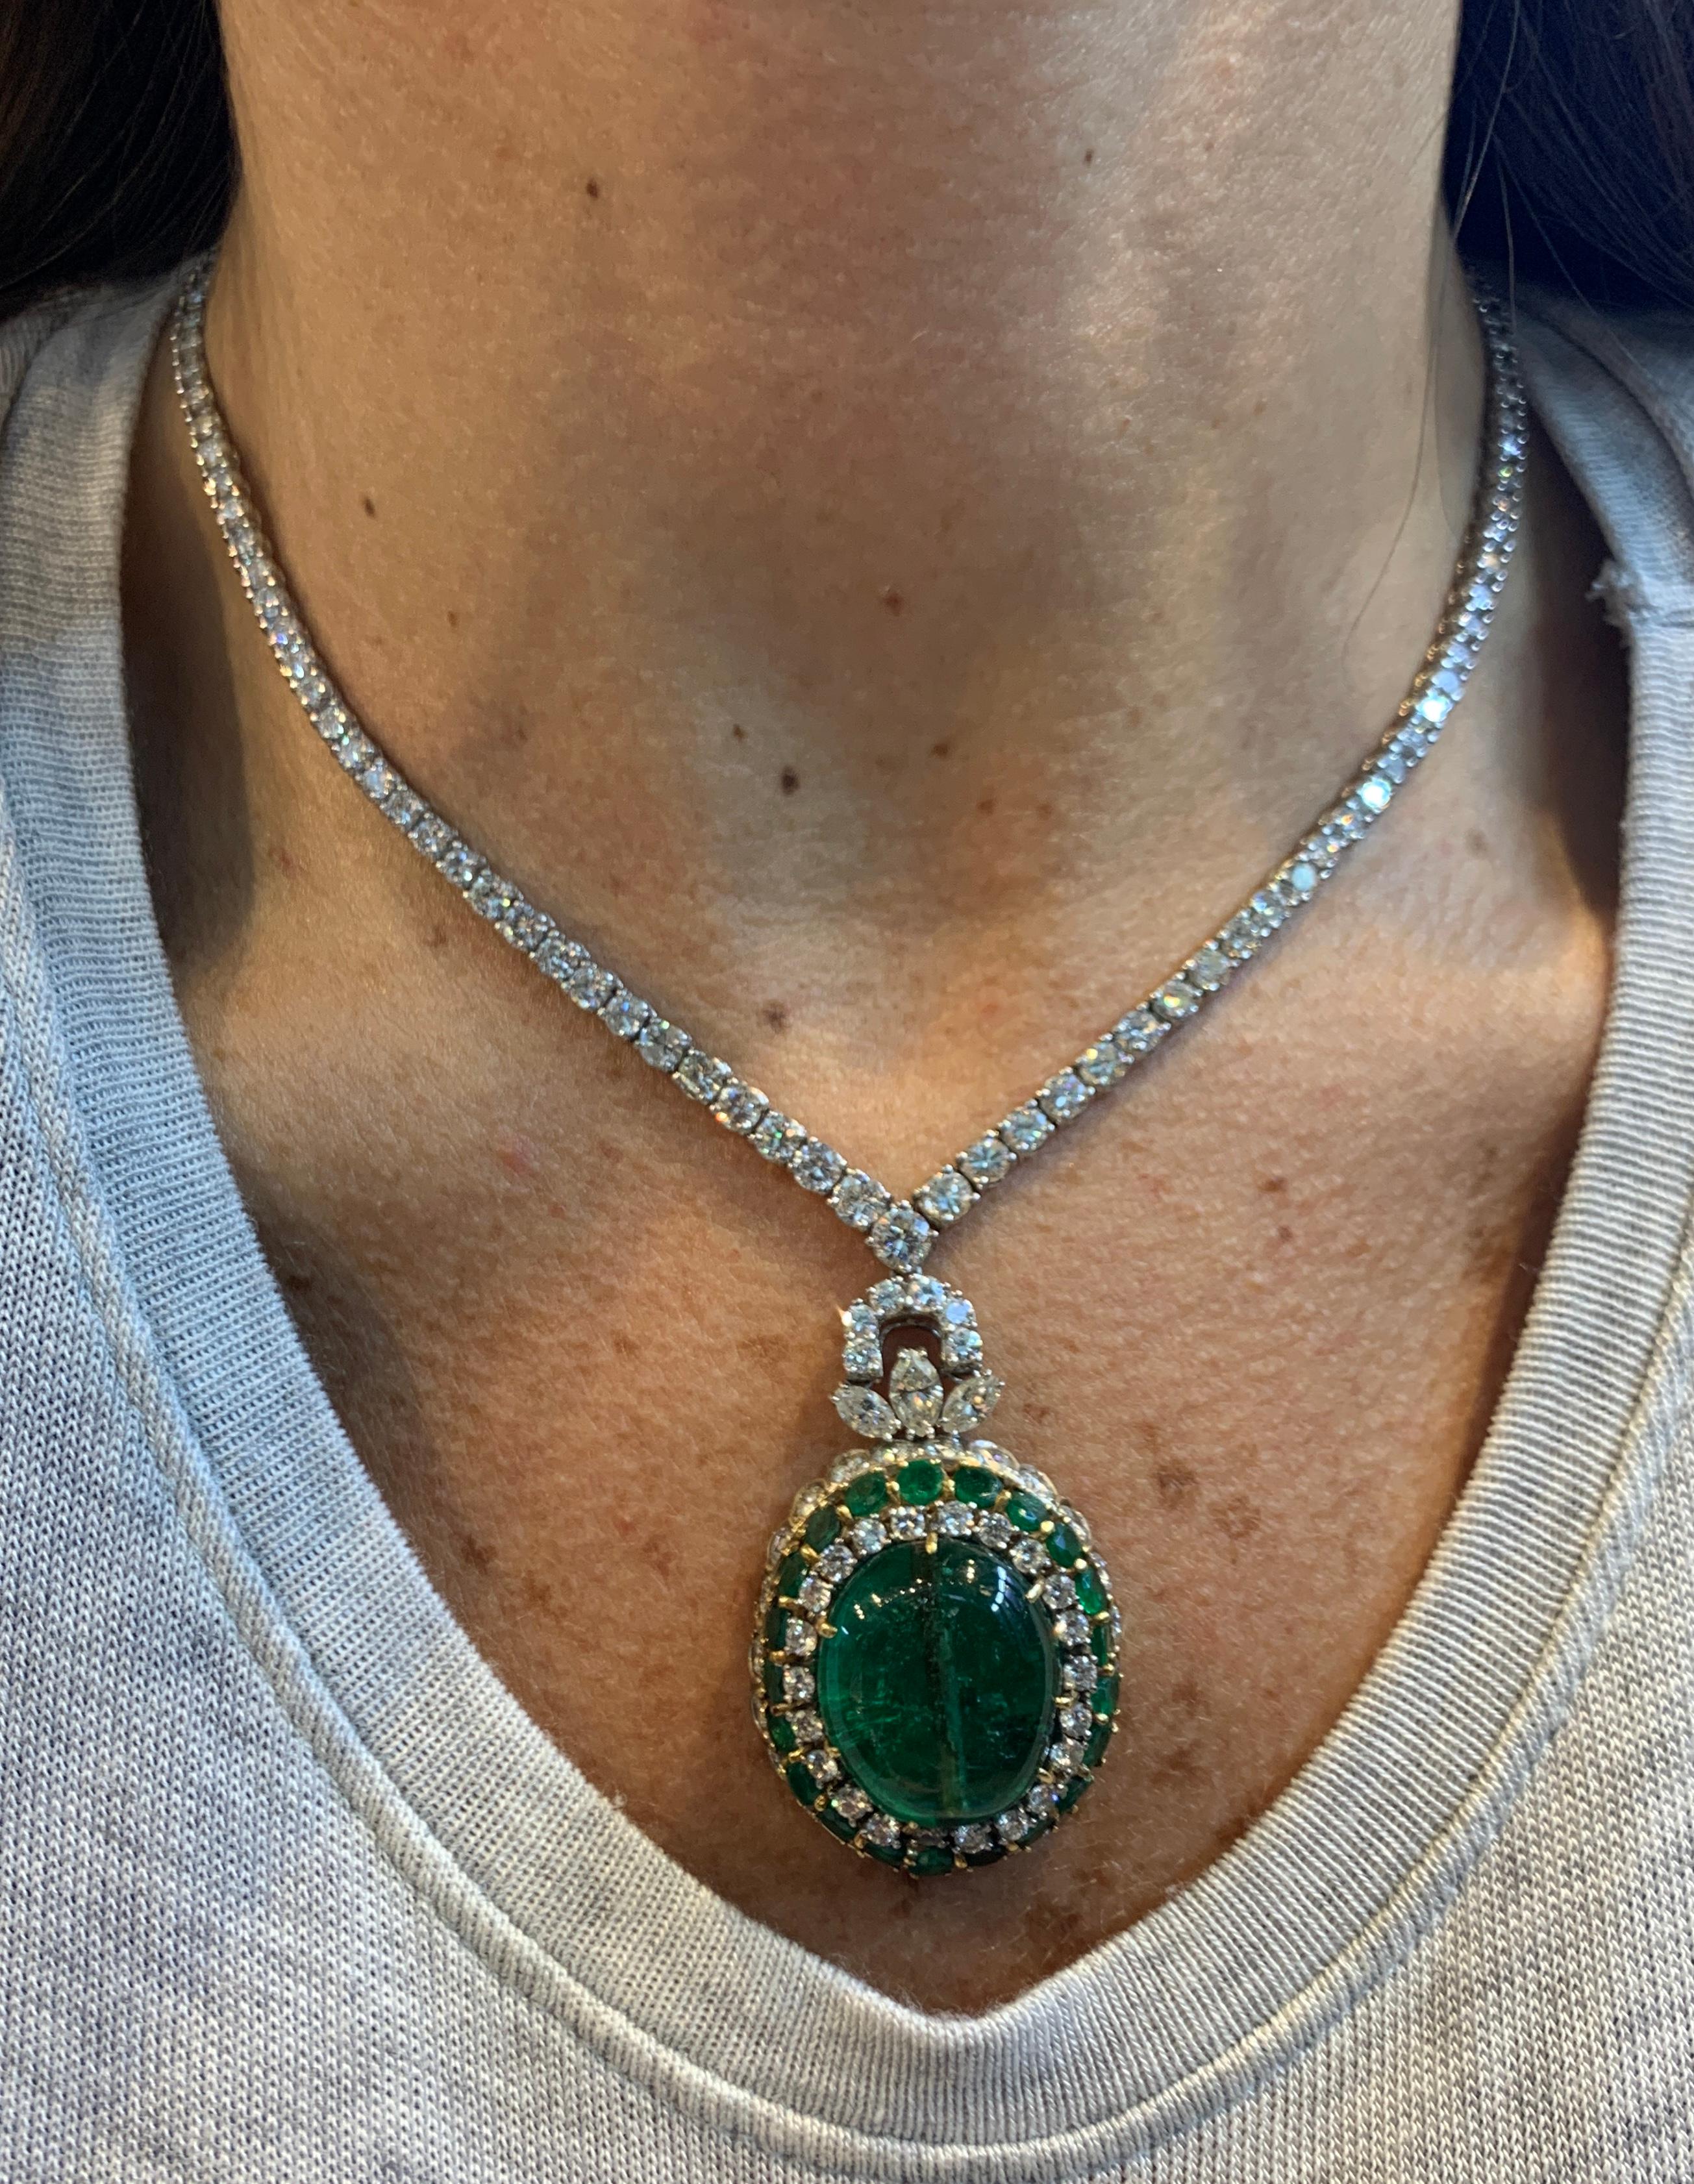 Vintage Style Emerald Green Antique Gold Luxury Pendant Necklace N485 